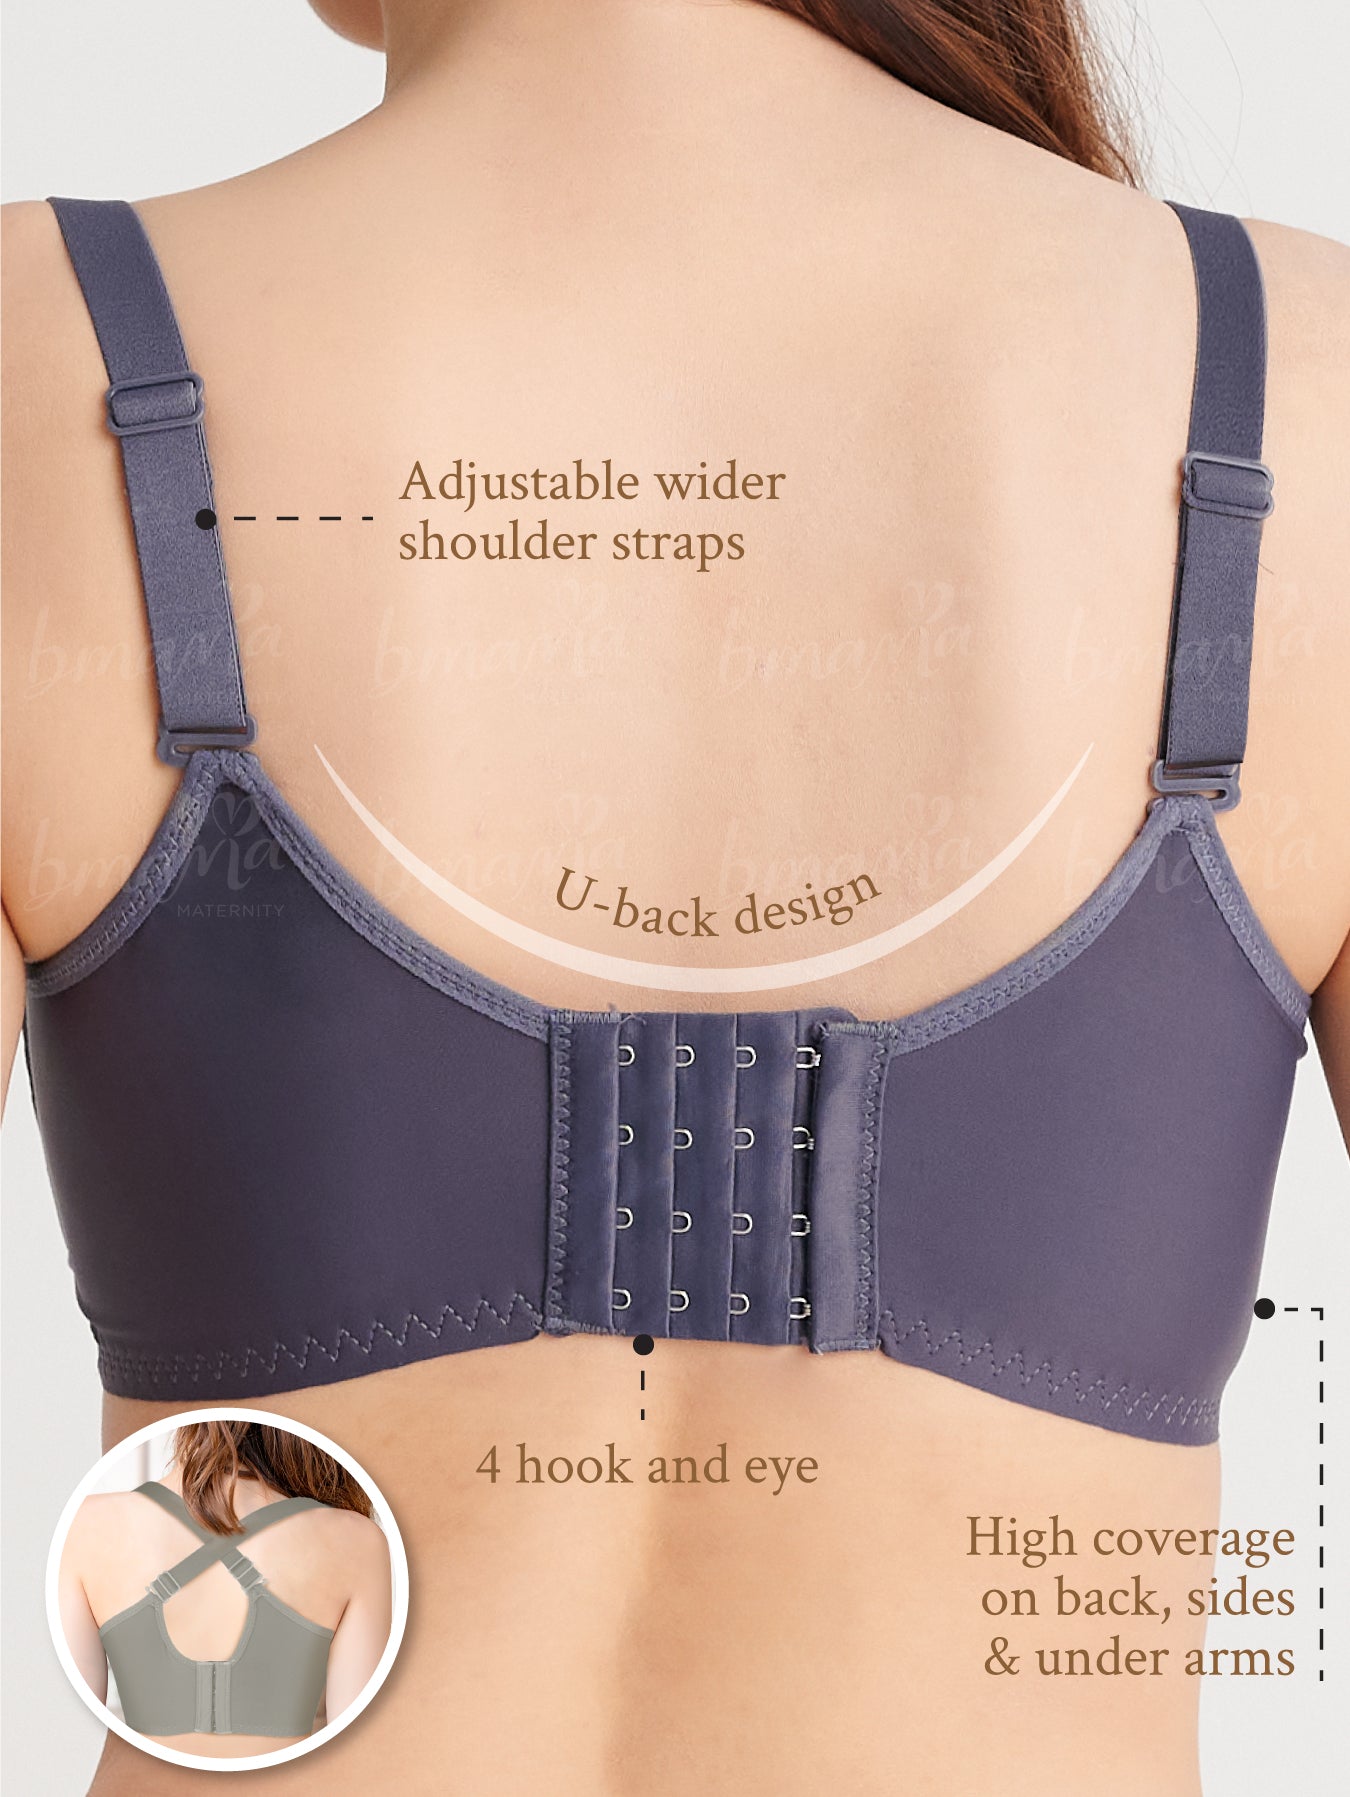 Nursing bra with soft cups for comfort